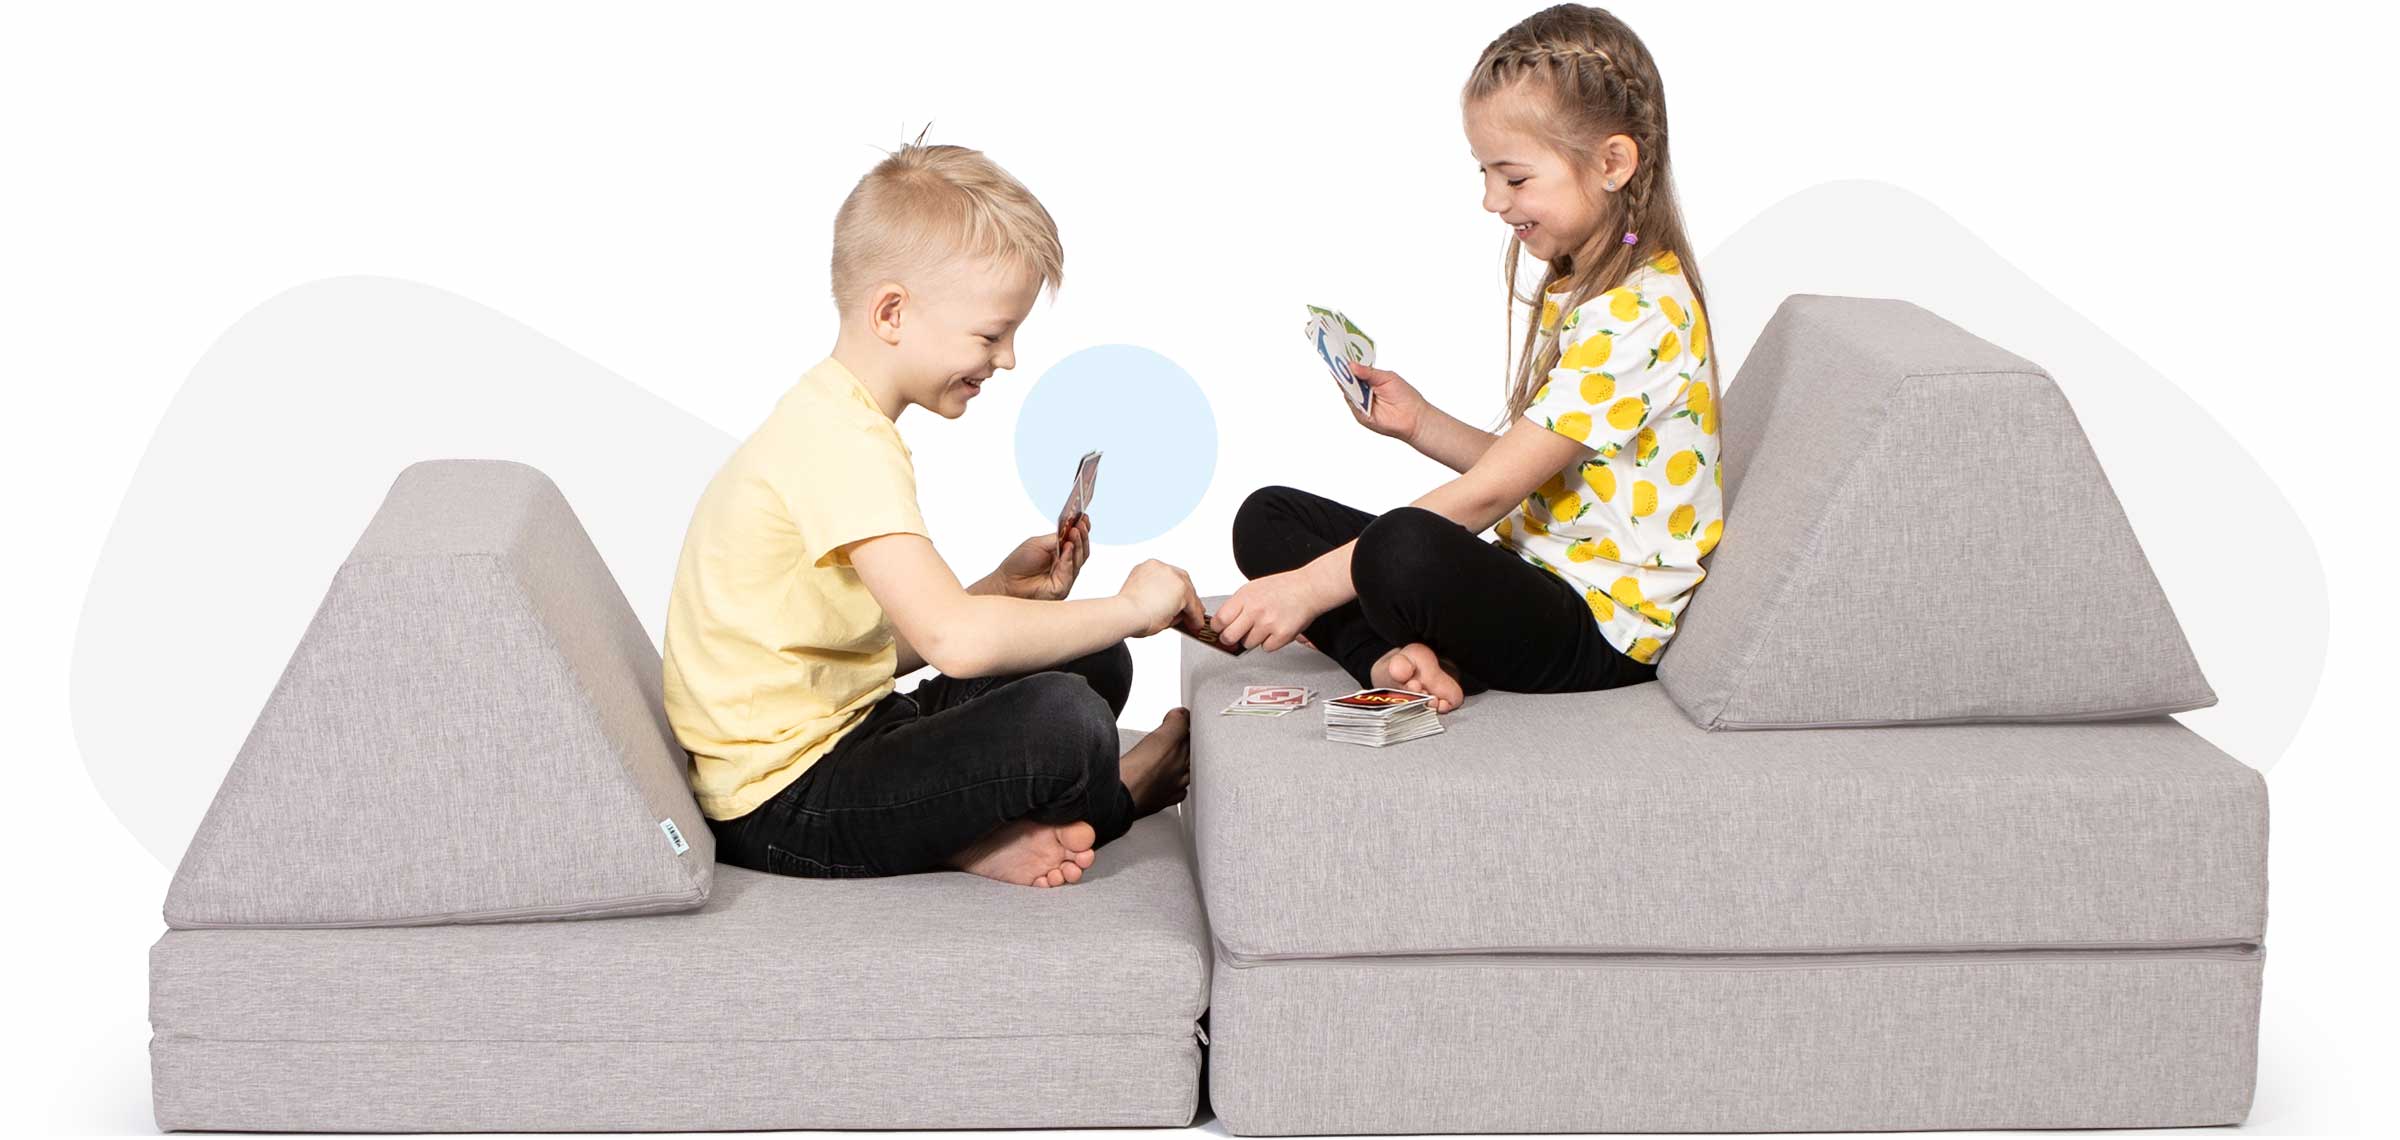 Kids sitting and playing cards on a beige Monboxy sofa